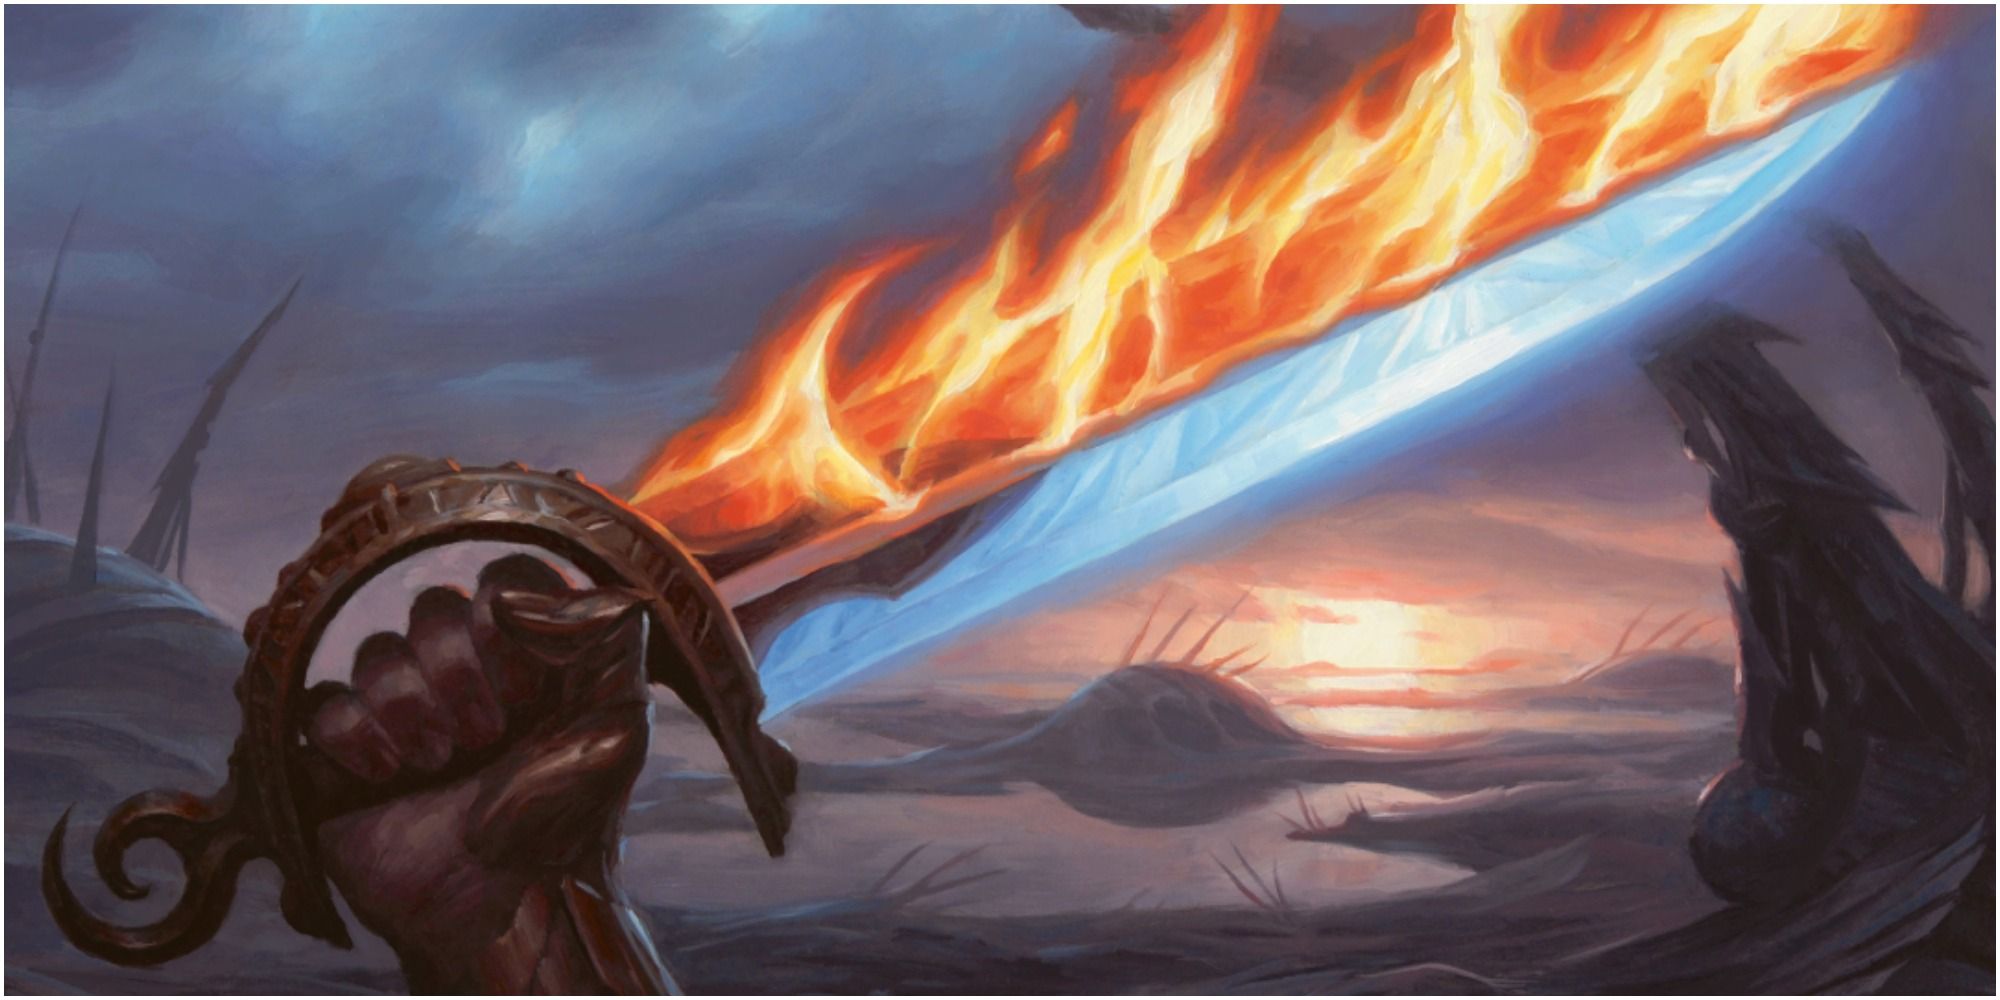 Magic The Gathering Sword of Fire and Ice card art